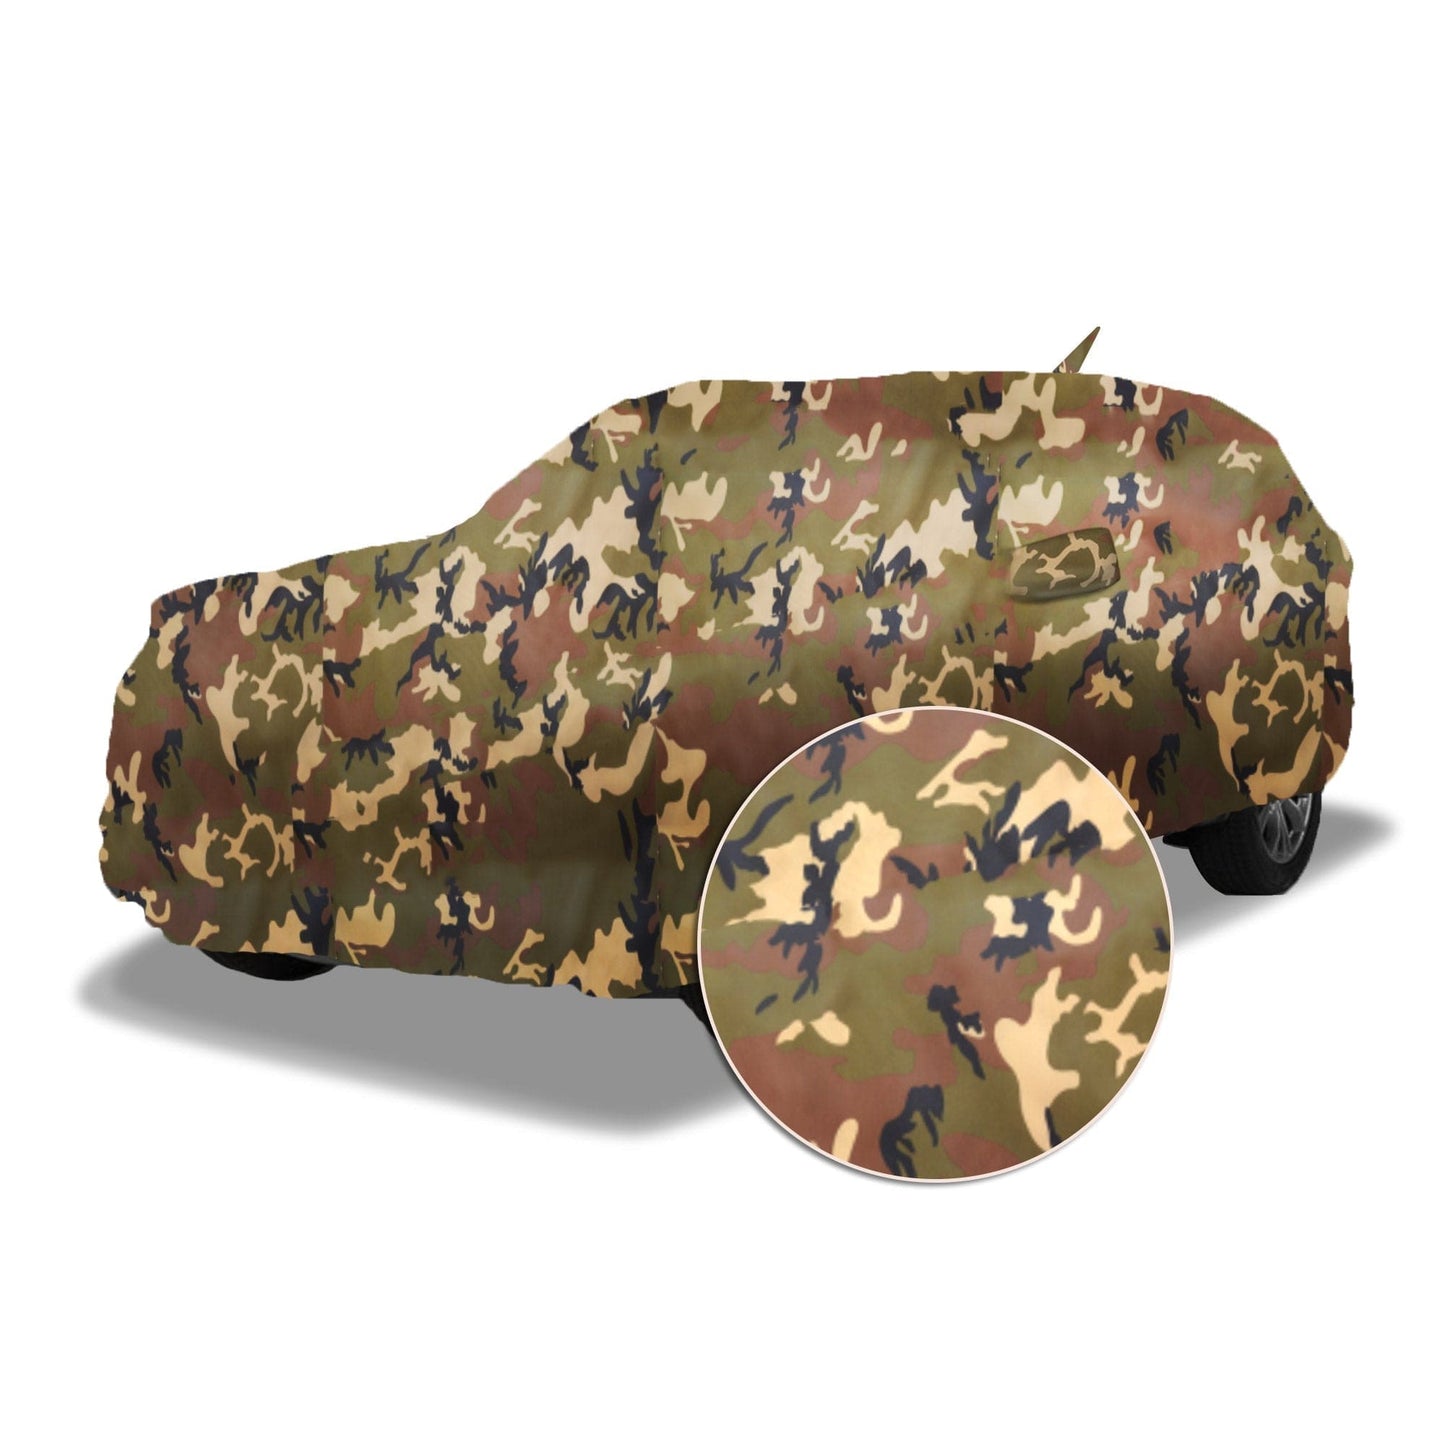 Ascot Maruti Jimny Car Body Cover Extra Strong & Dust Proof Jungle Military Car Cover with UV Proof & Water-Resistant Coating